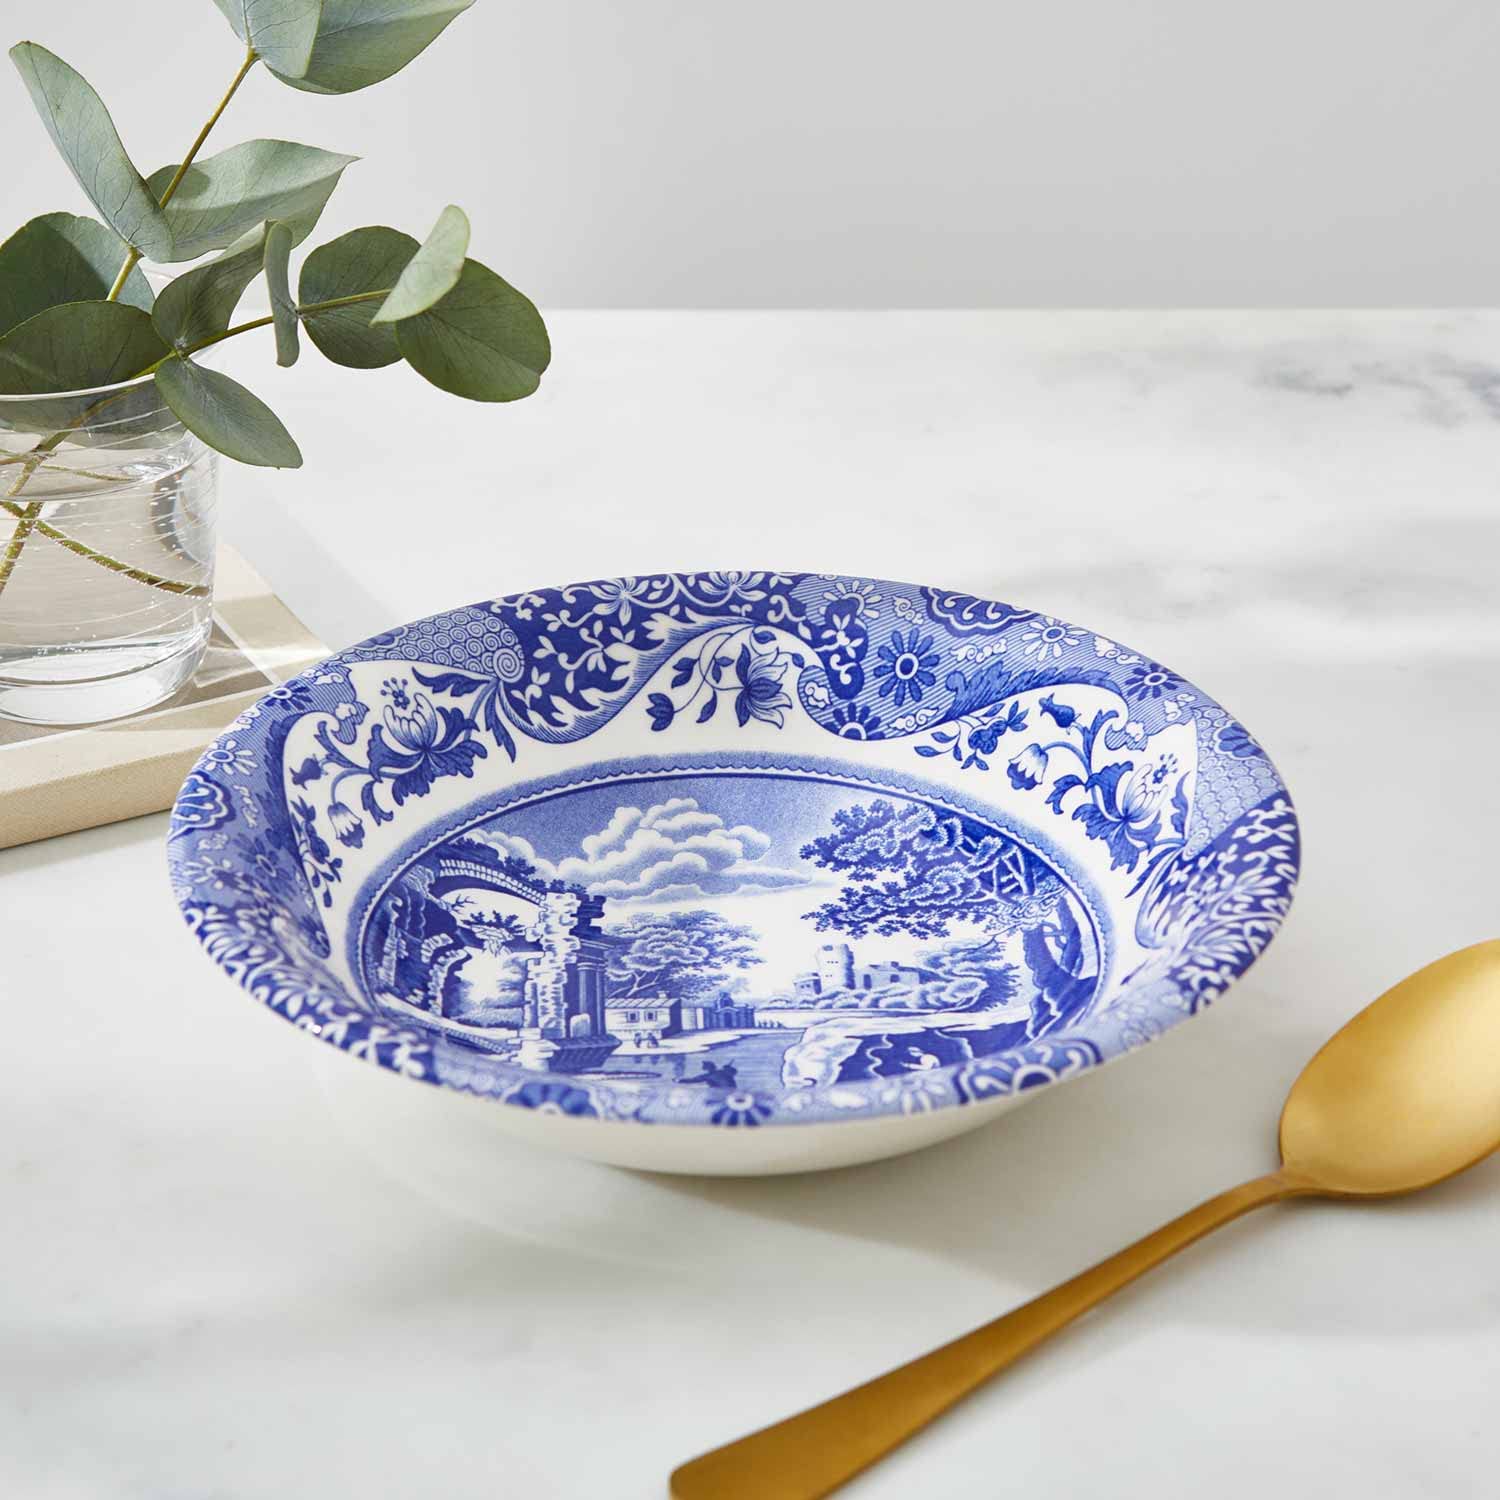 Spode Blue Italian Cereal Bowl | Set of 4 | Oatmeal, Cereal, and Rice Bowl | Made of Earthenware | 6.5-Inches | Dishwasher and Microwave Safe | Made in England